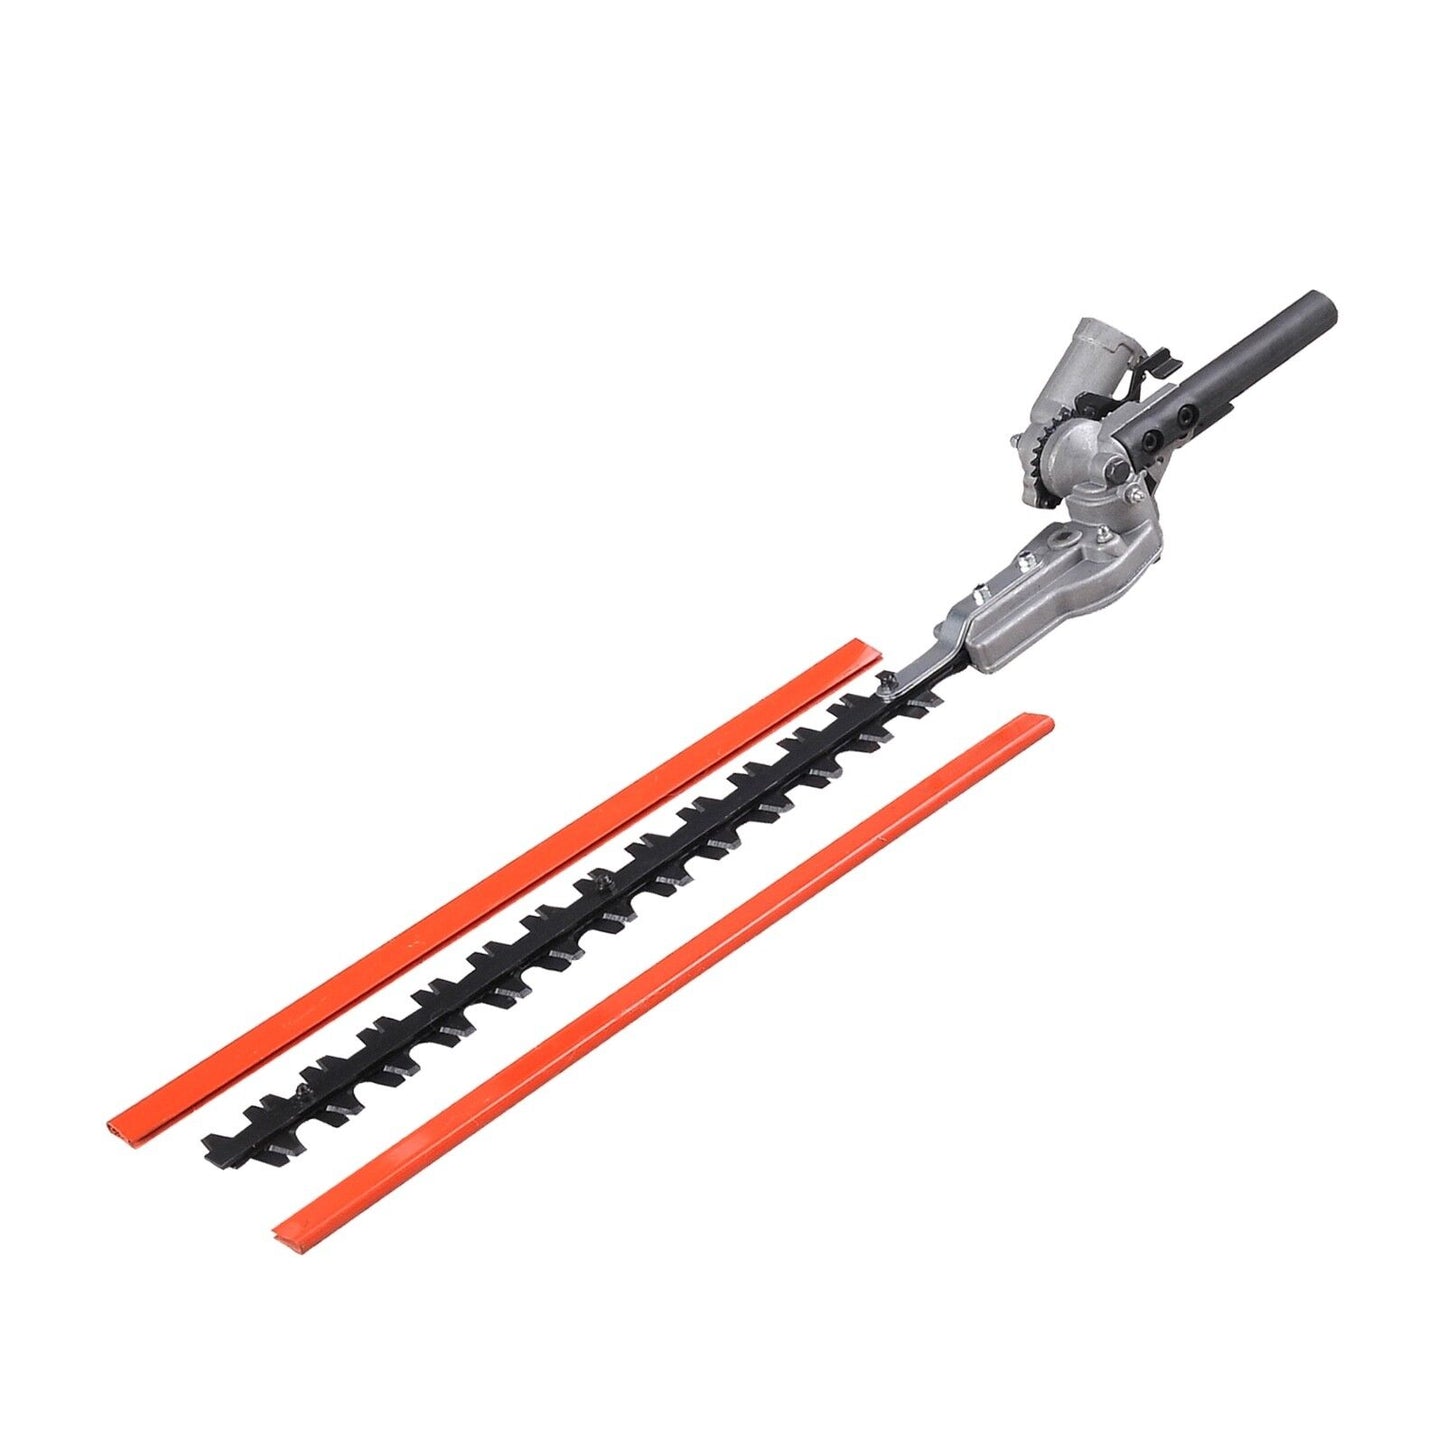 Hedge Trimmer Attachment for Brushcutter,Multi Tool,Pruner,Pole Saw Fit YUKON